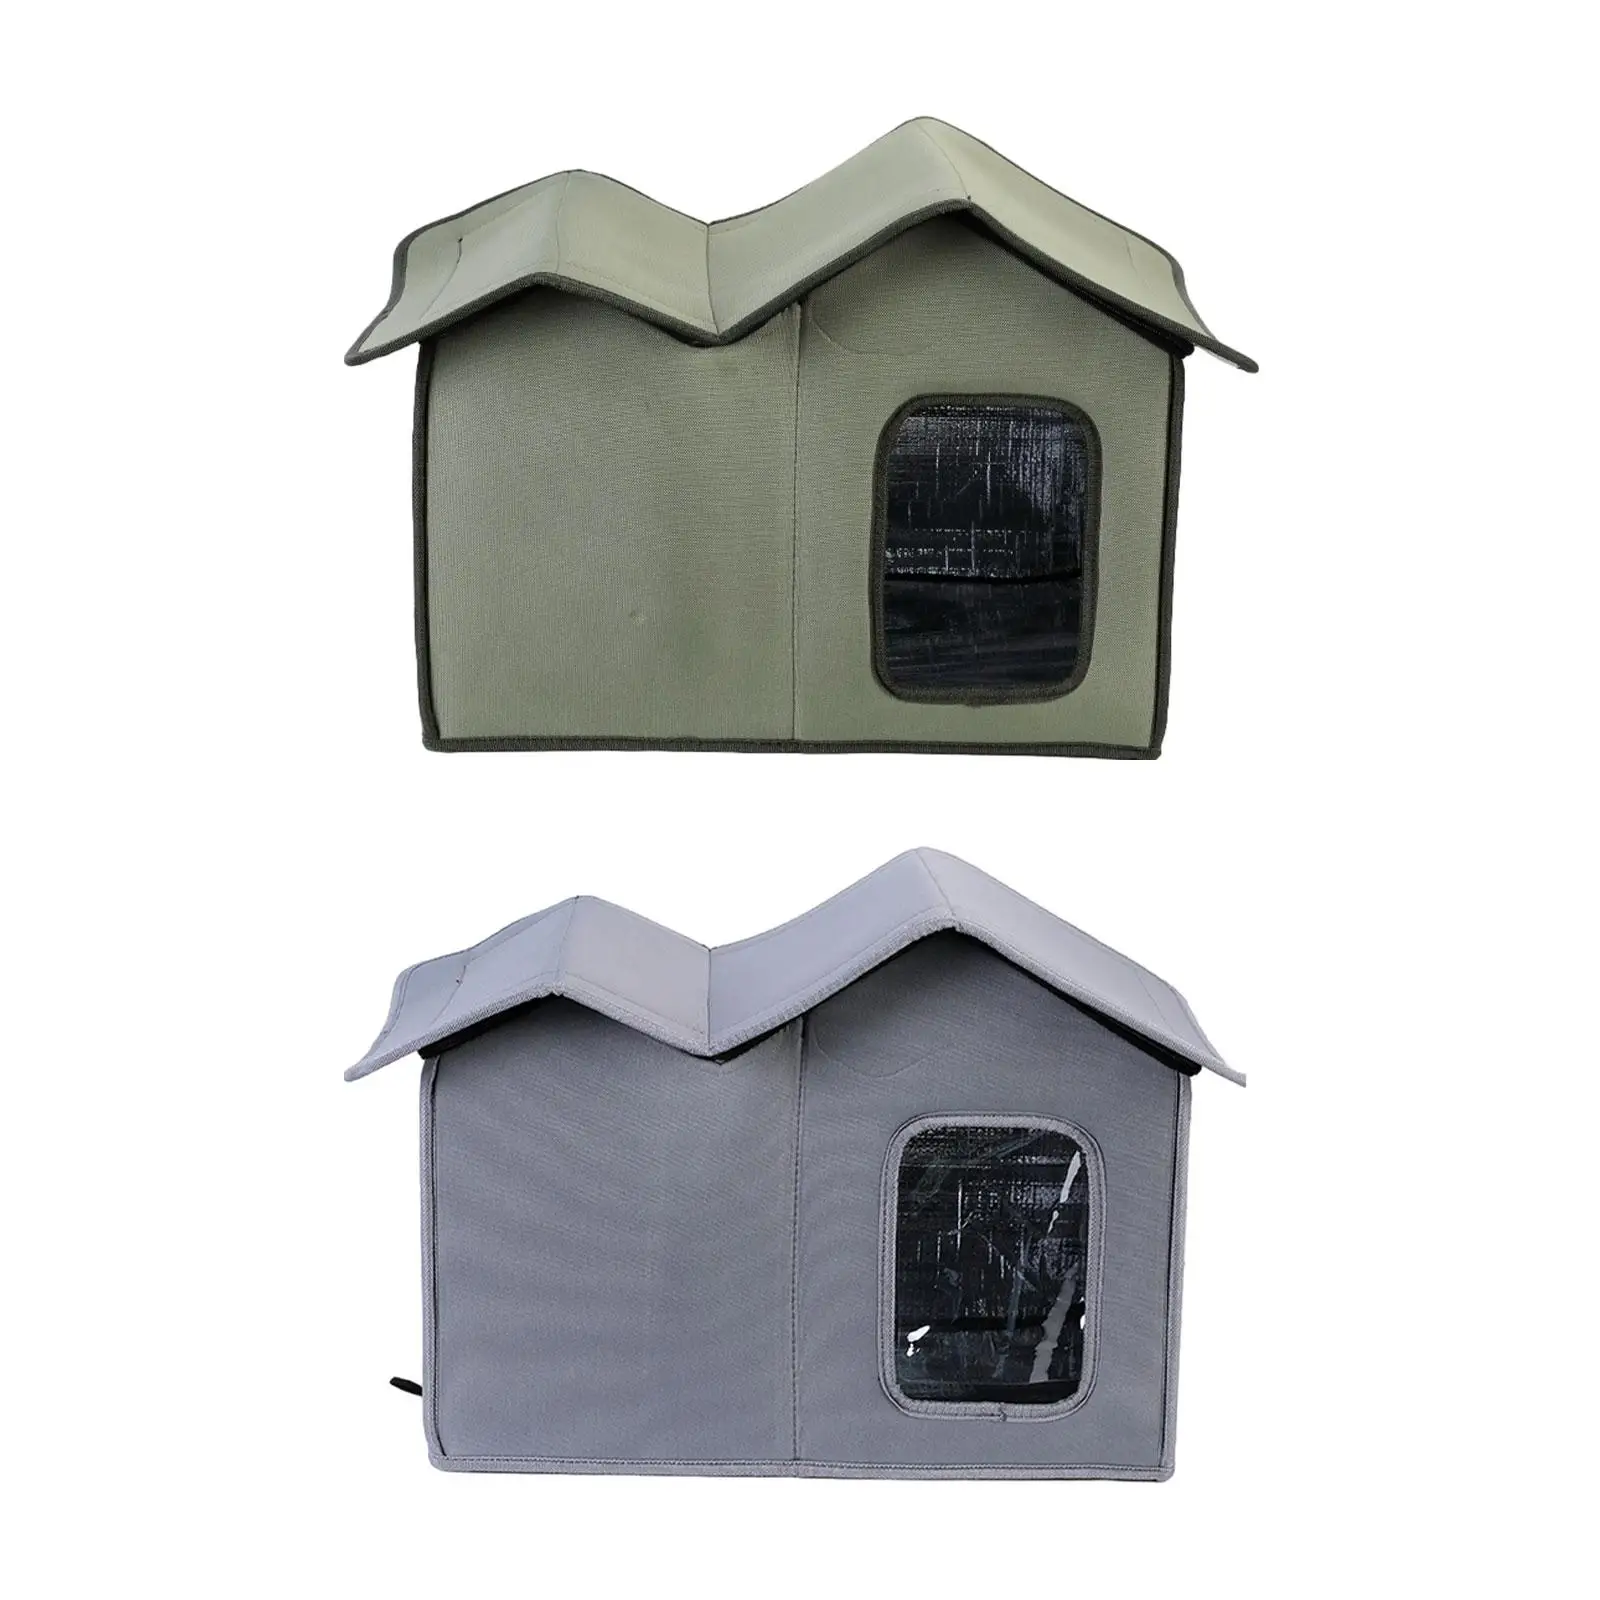 Dog House Weatherproof Waterproof Oxford Cloth Rainproof Pet Shelter for Courtyard Puppy Cats and Small Dogs Indoor Home